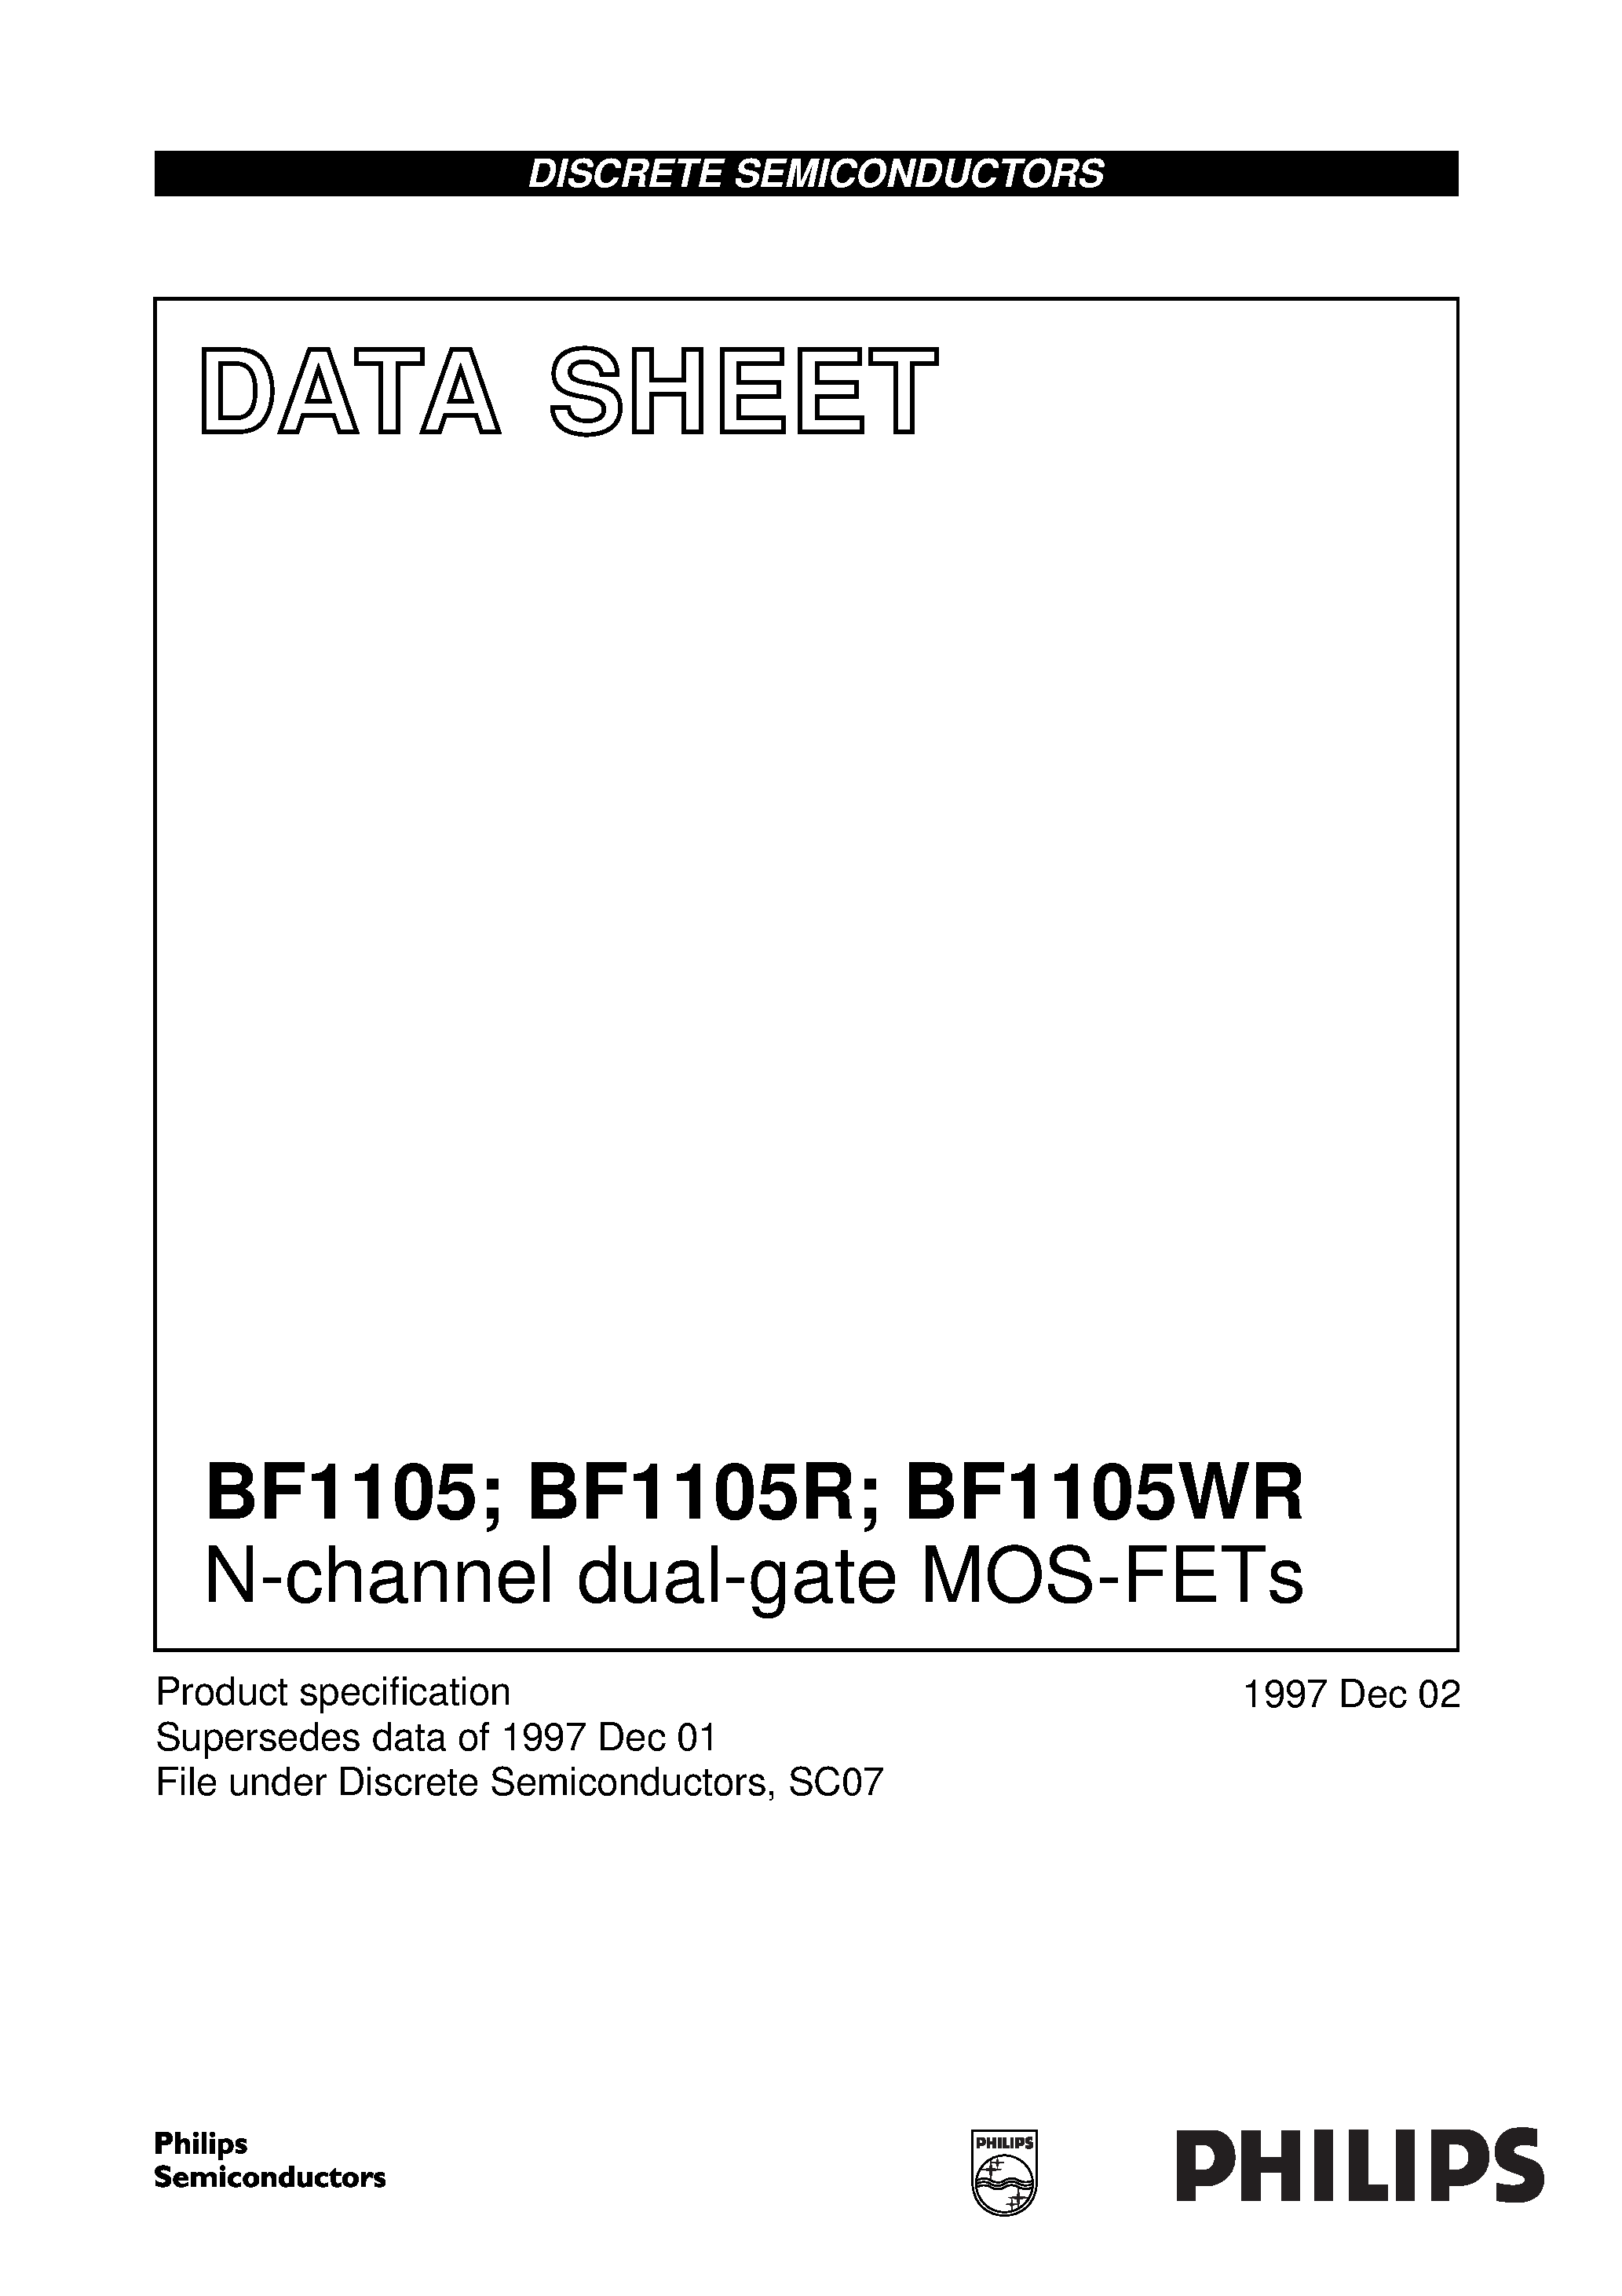 Datasheet BF1105R - N-channel dual-gate MOS-FETs page 1